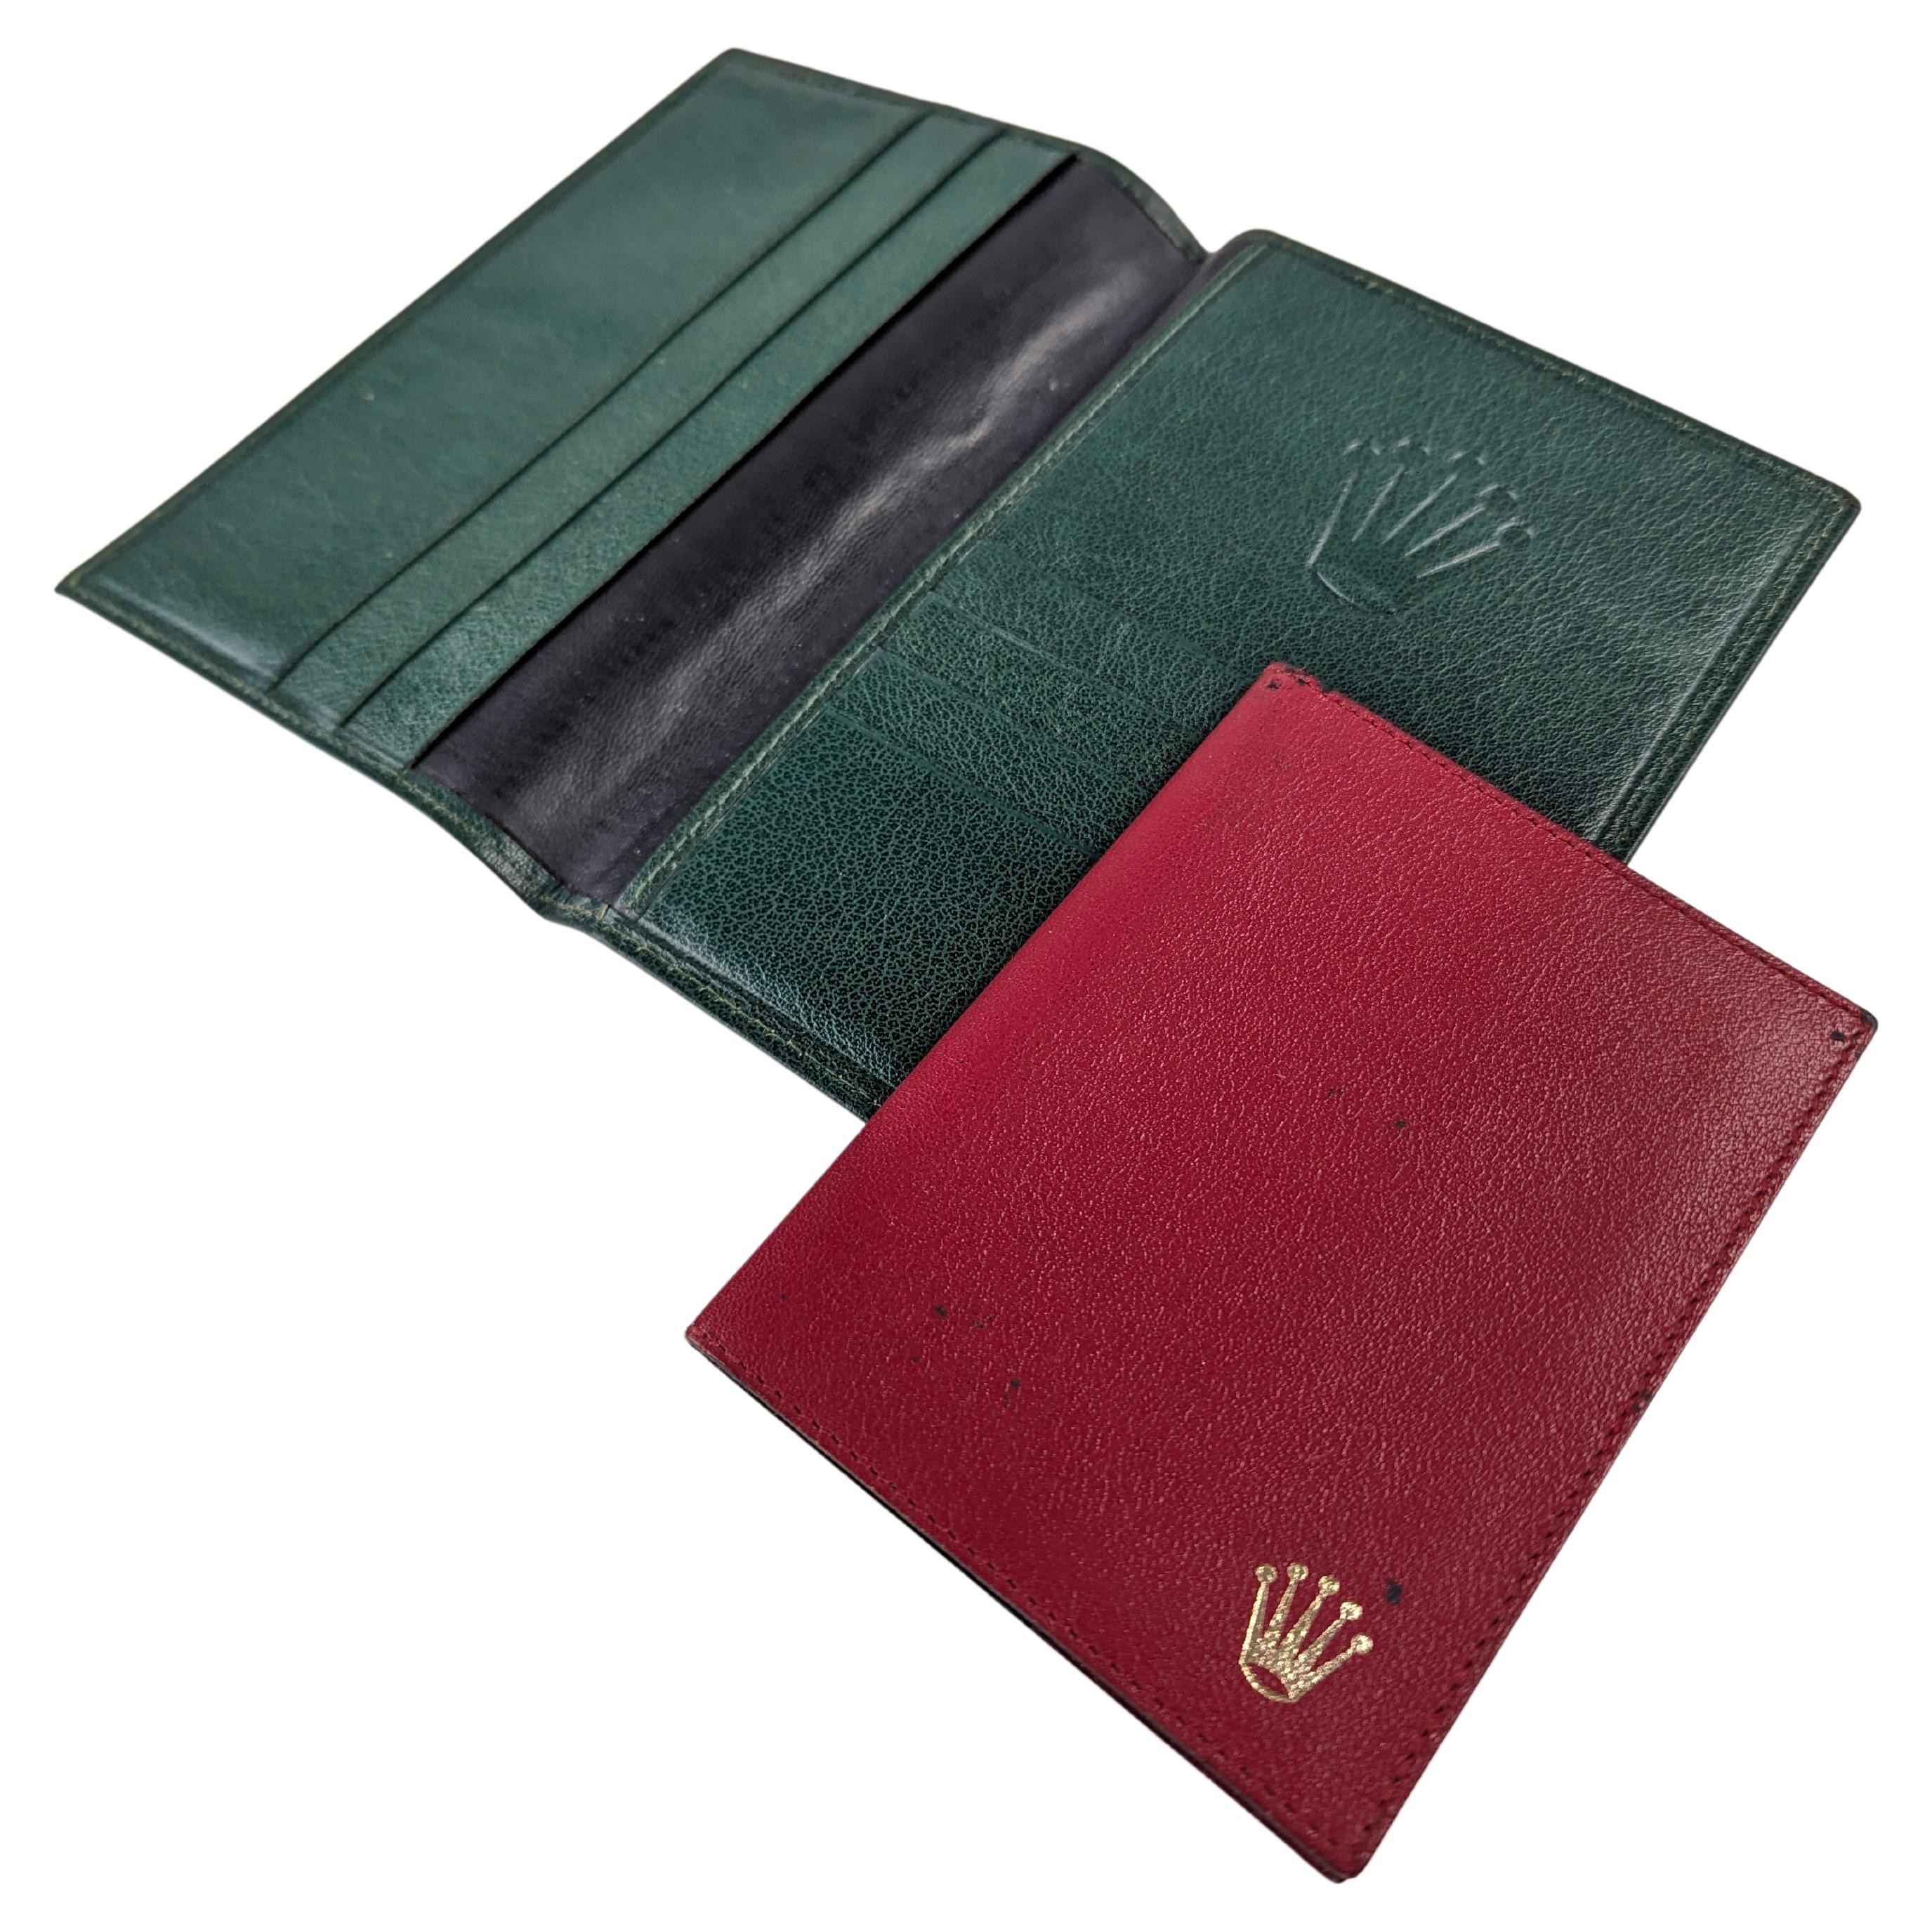 Vintage Rolex Green and Red Leather Wallet and Passport